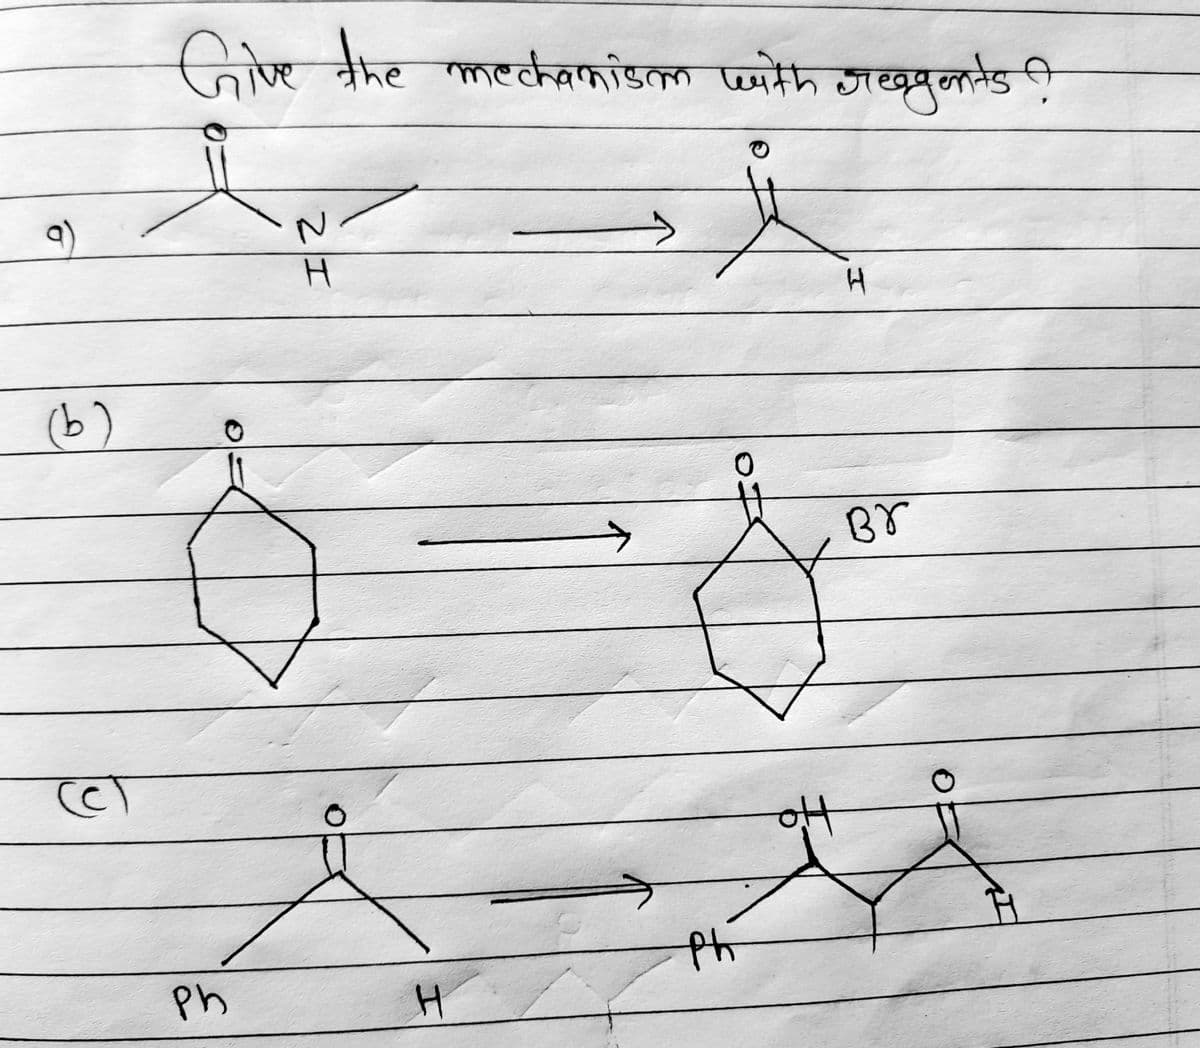 (b)
टा
Give the mechanism with reagents ?
H
Br
ph
N
21
H
H
ph
O.
oH